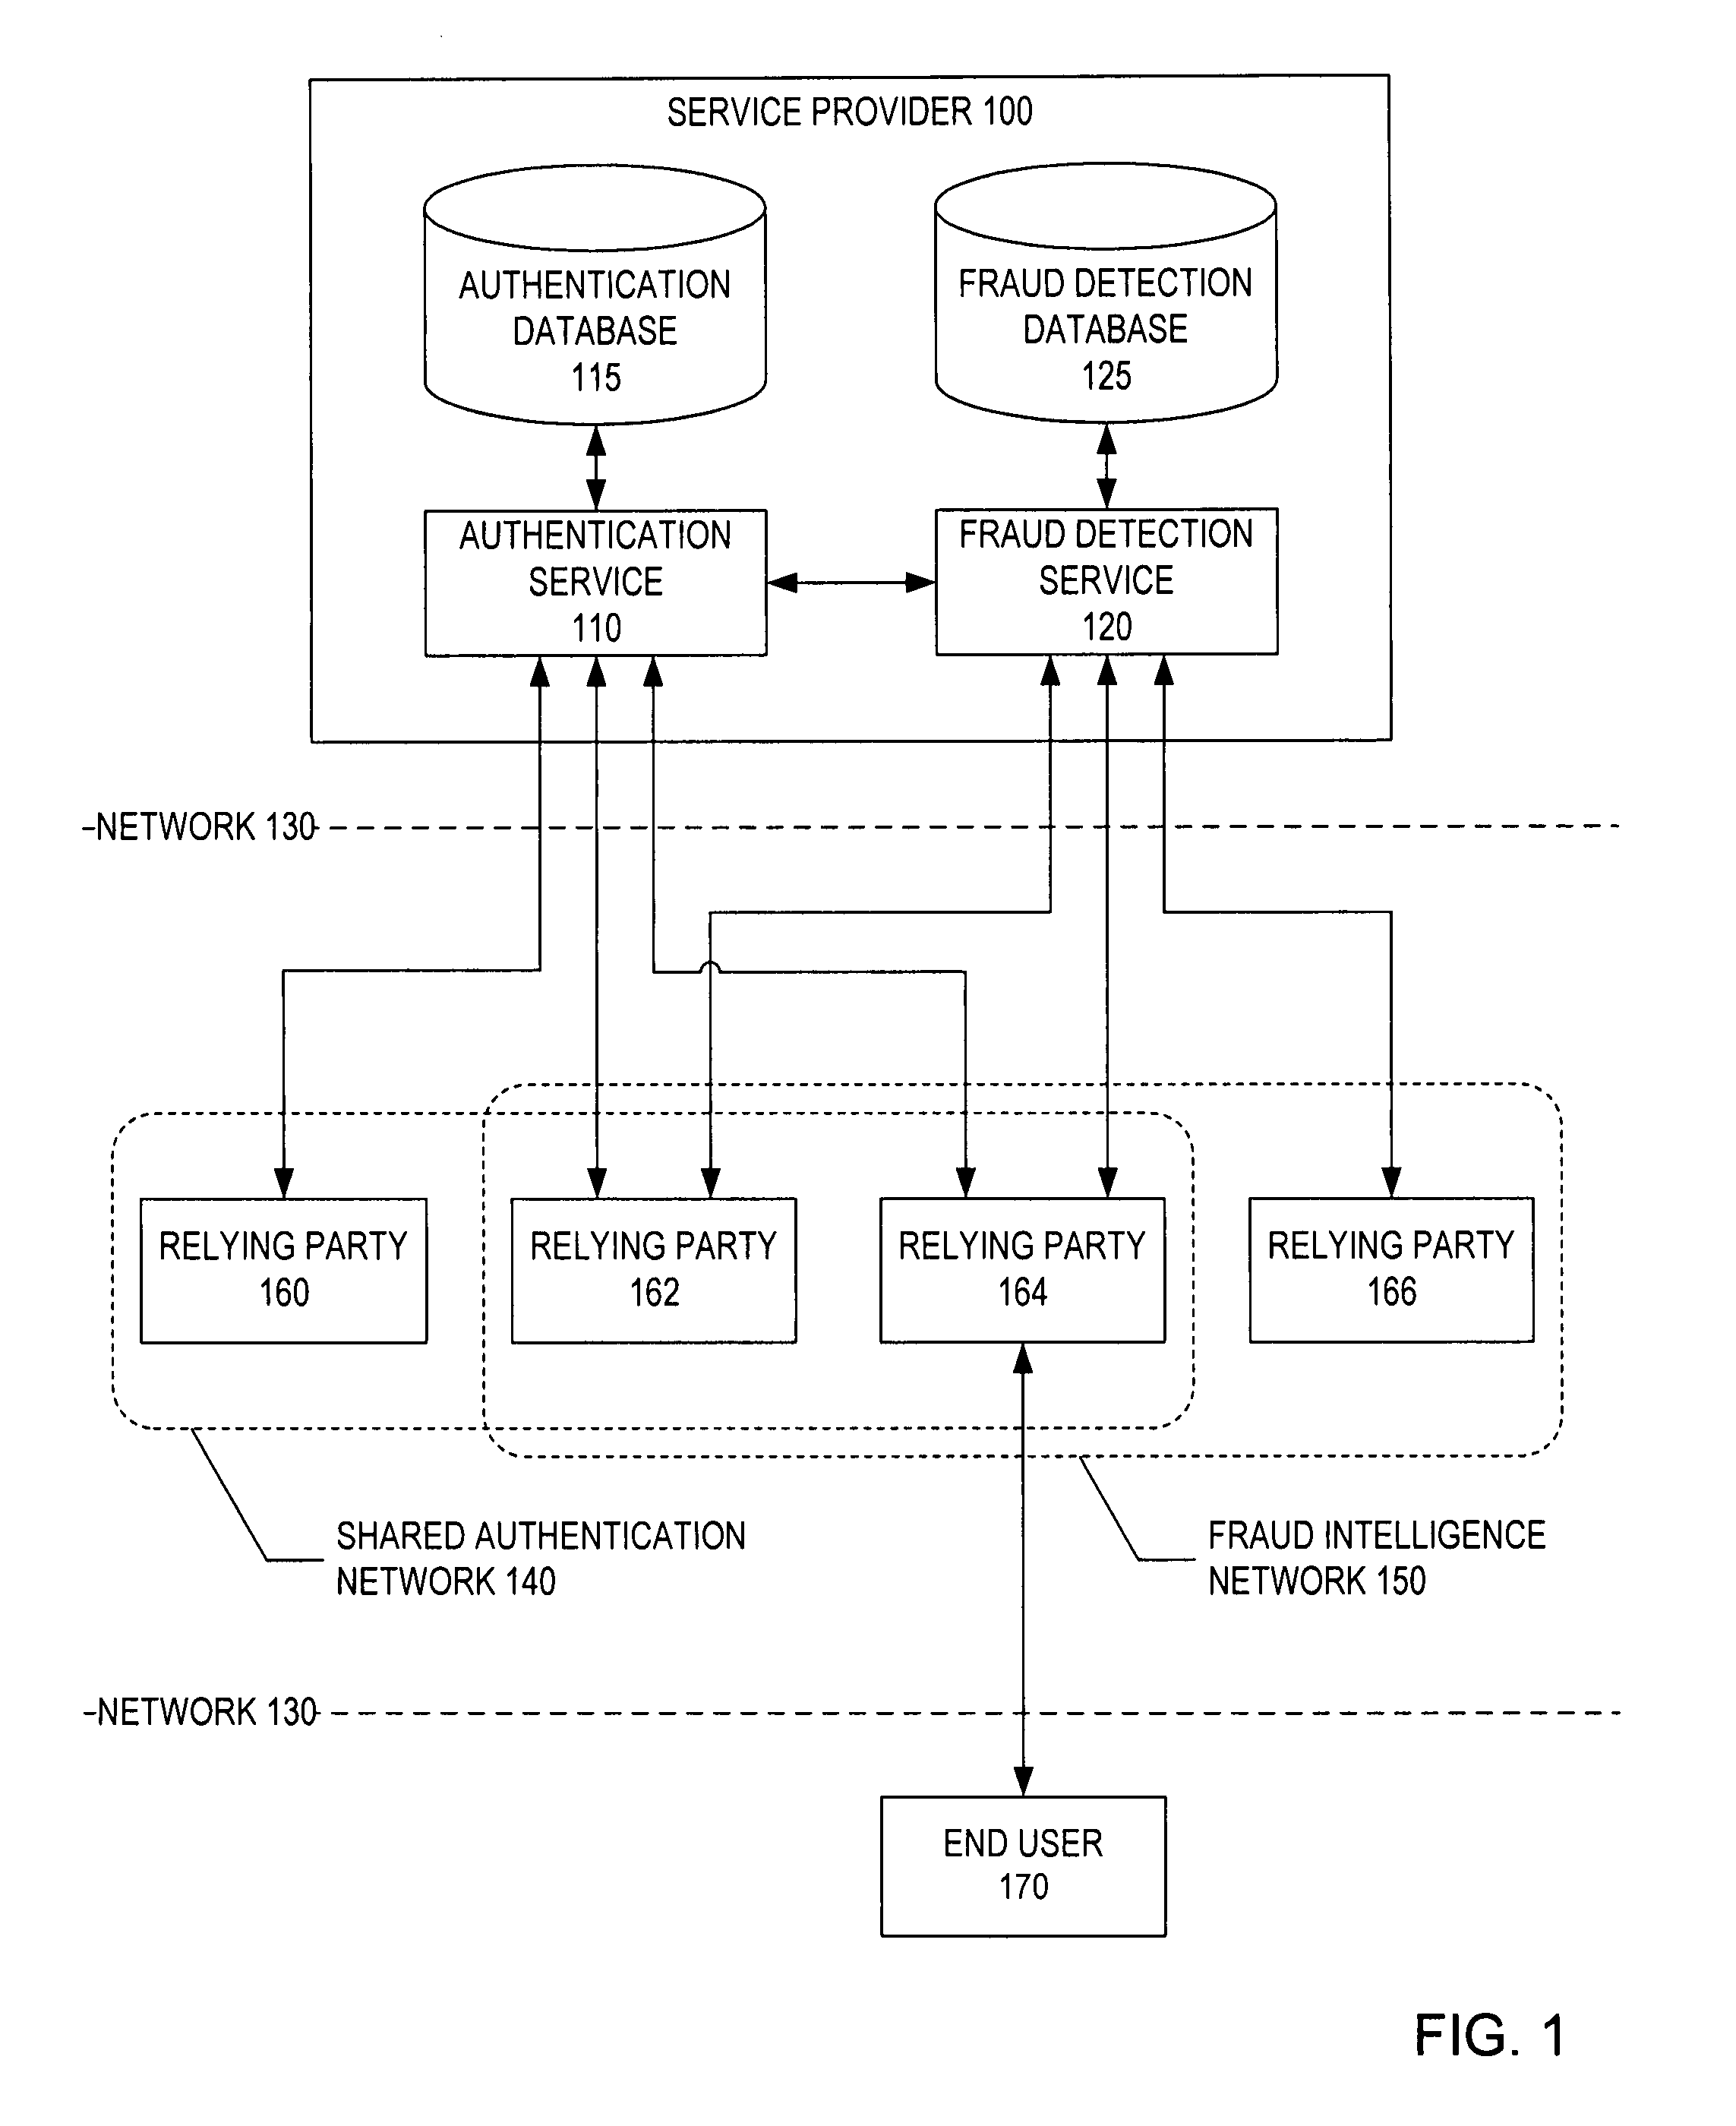 System and method for network-based fraud and authentication services